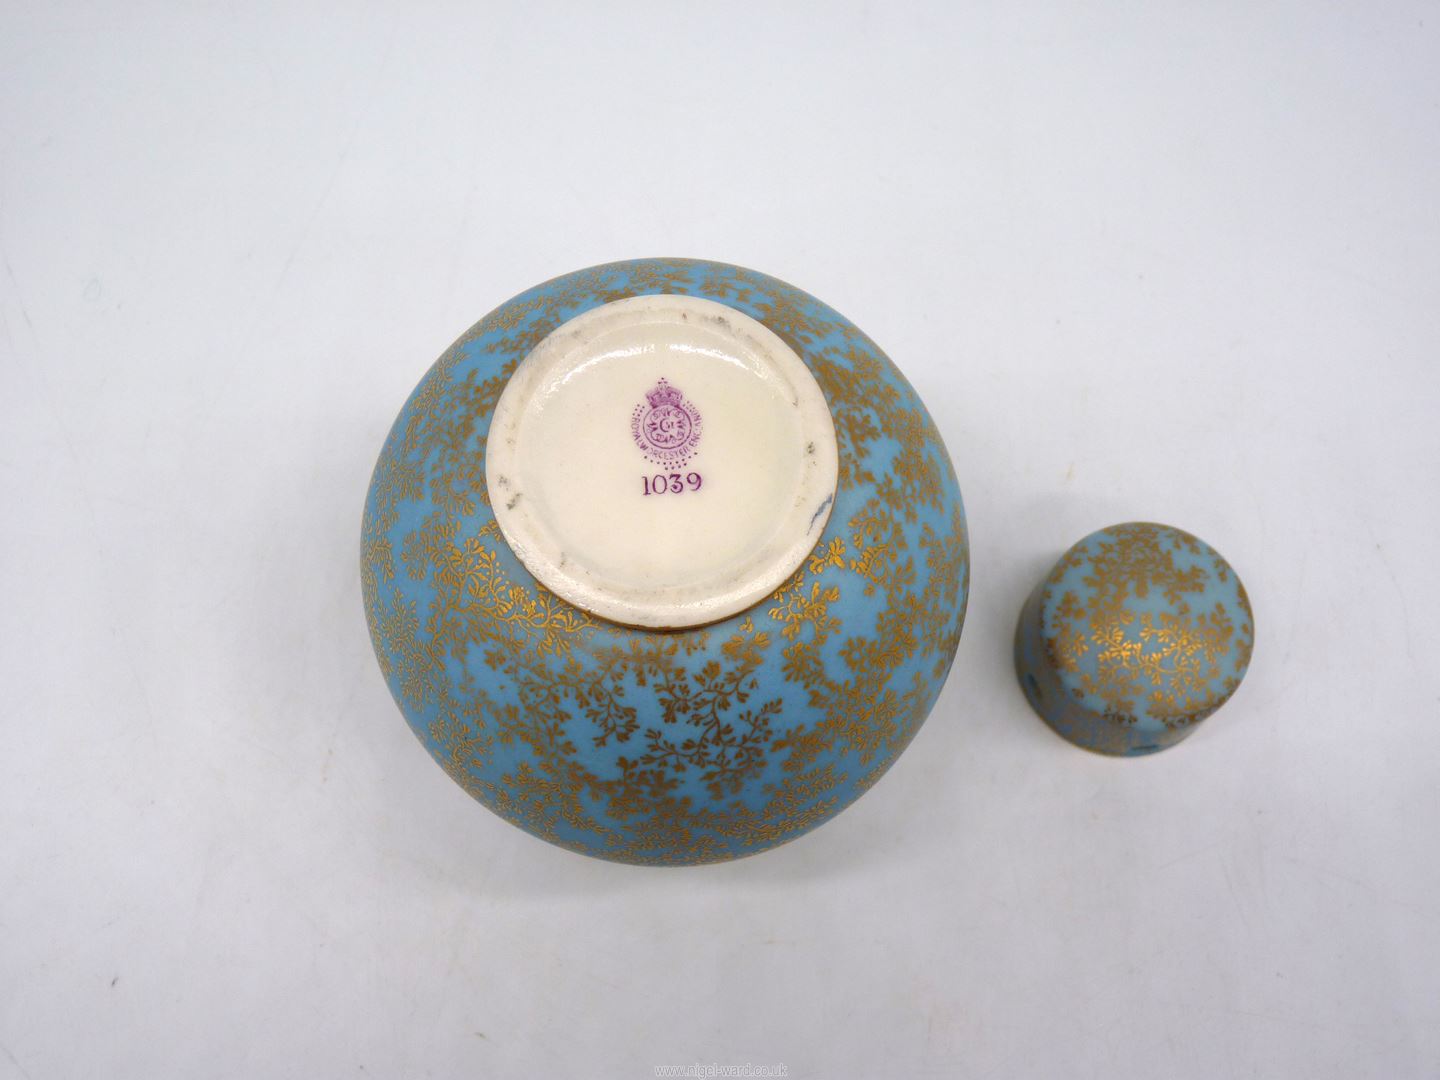 An unusual Royal Worcester porcelain spherical bottle and cover pot pourri in turquoise blue and - Image 3 of 3